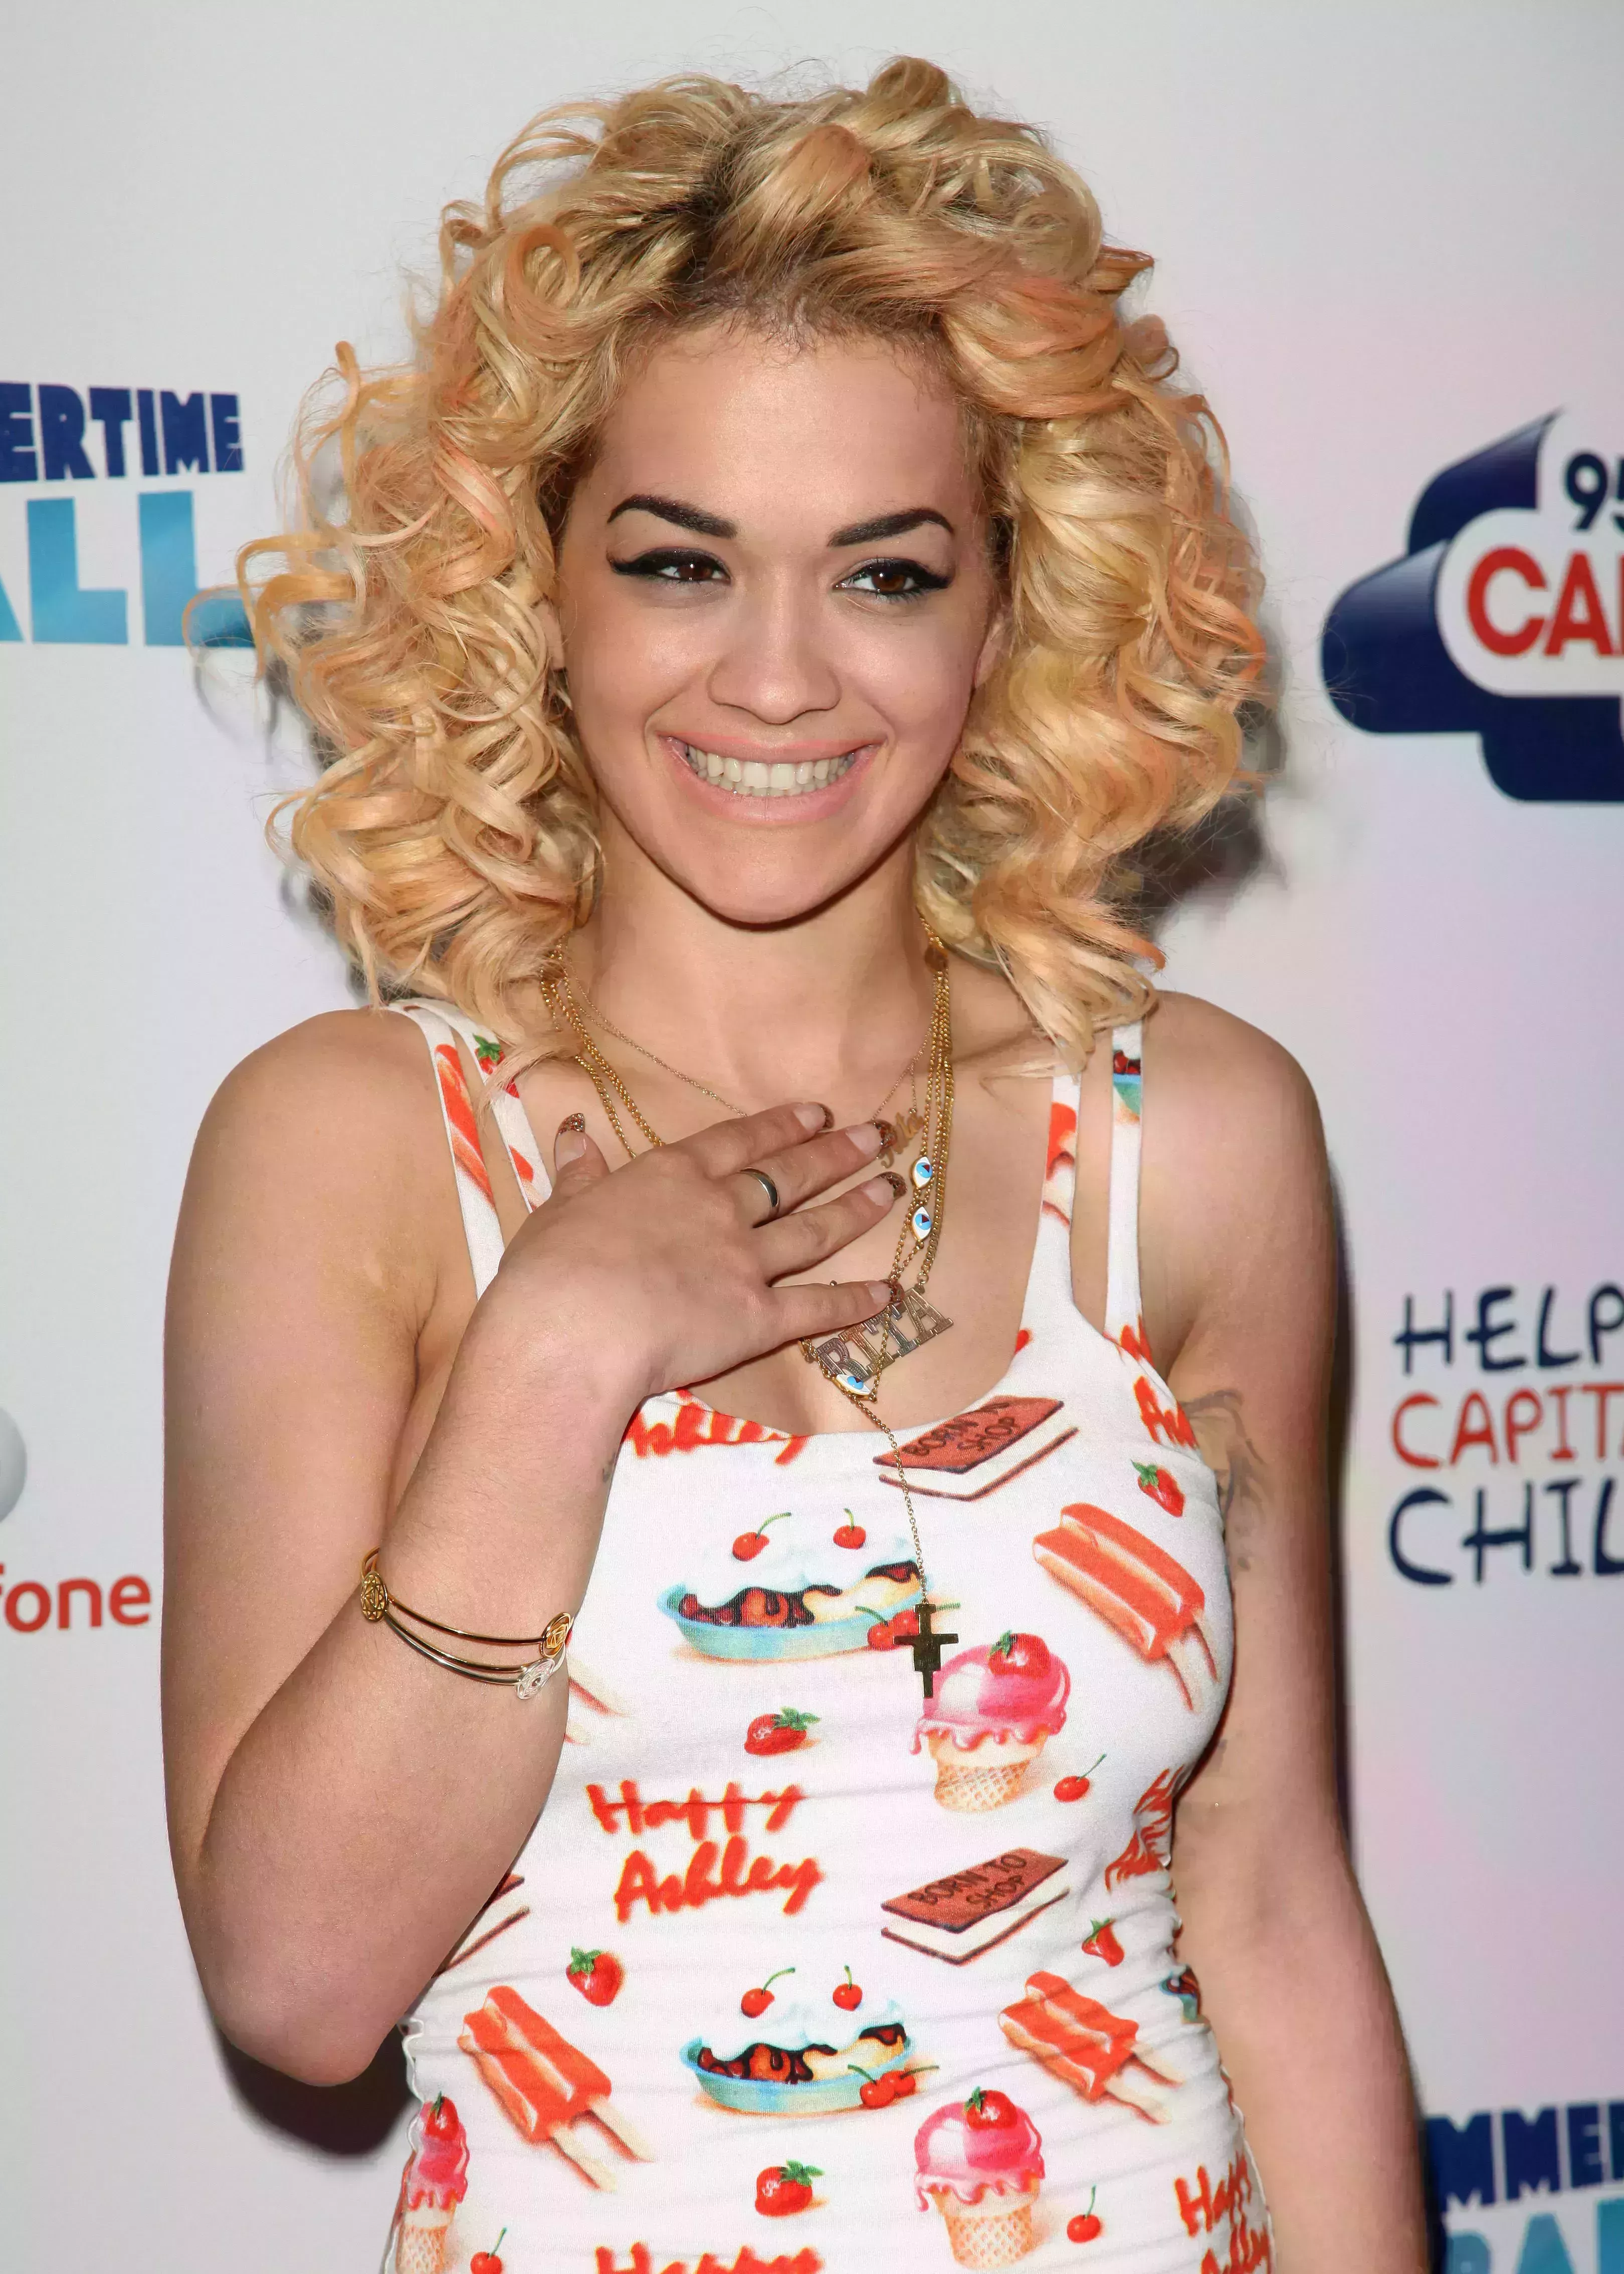 Rita Ora’s Buttery Blonde Curls with Subtle Pink Highlights